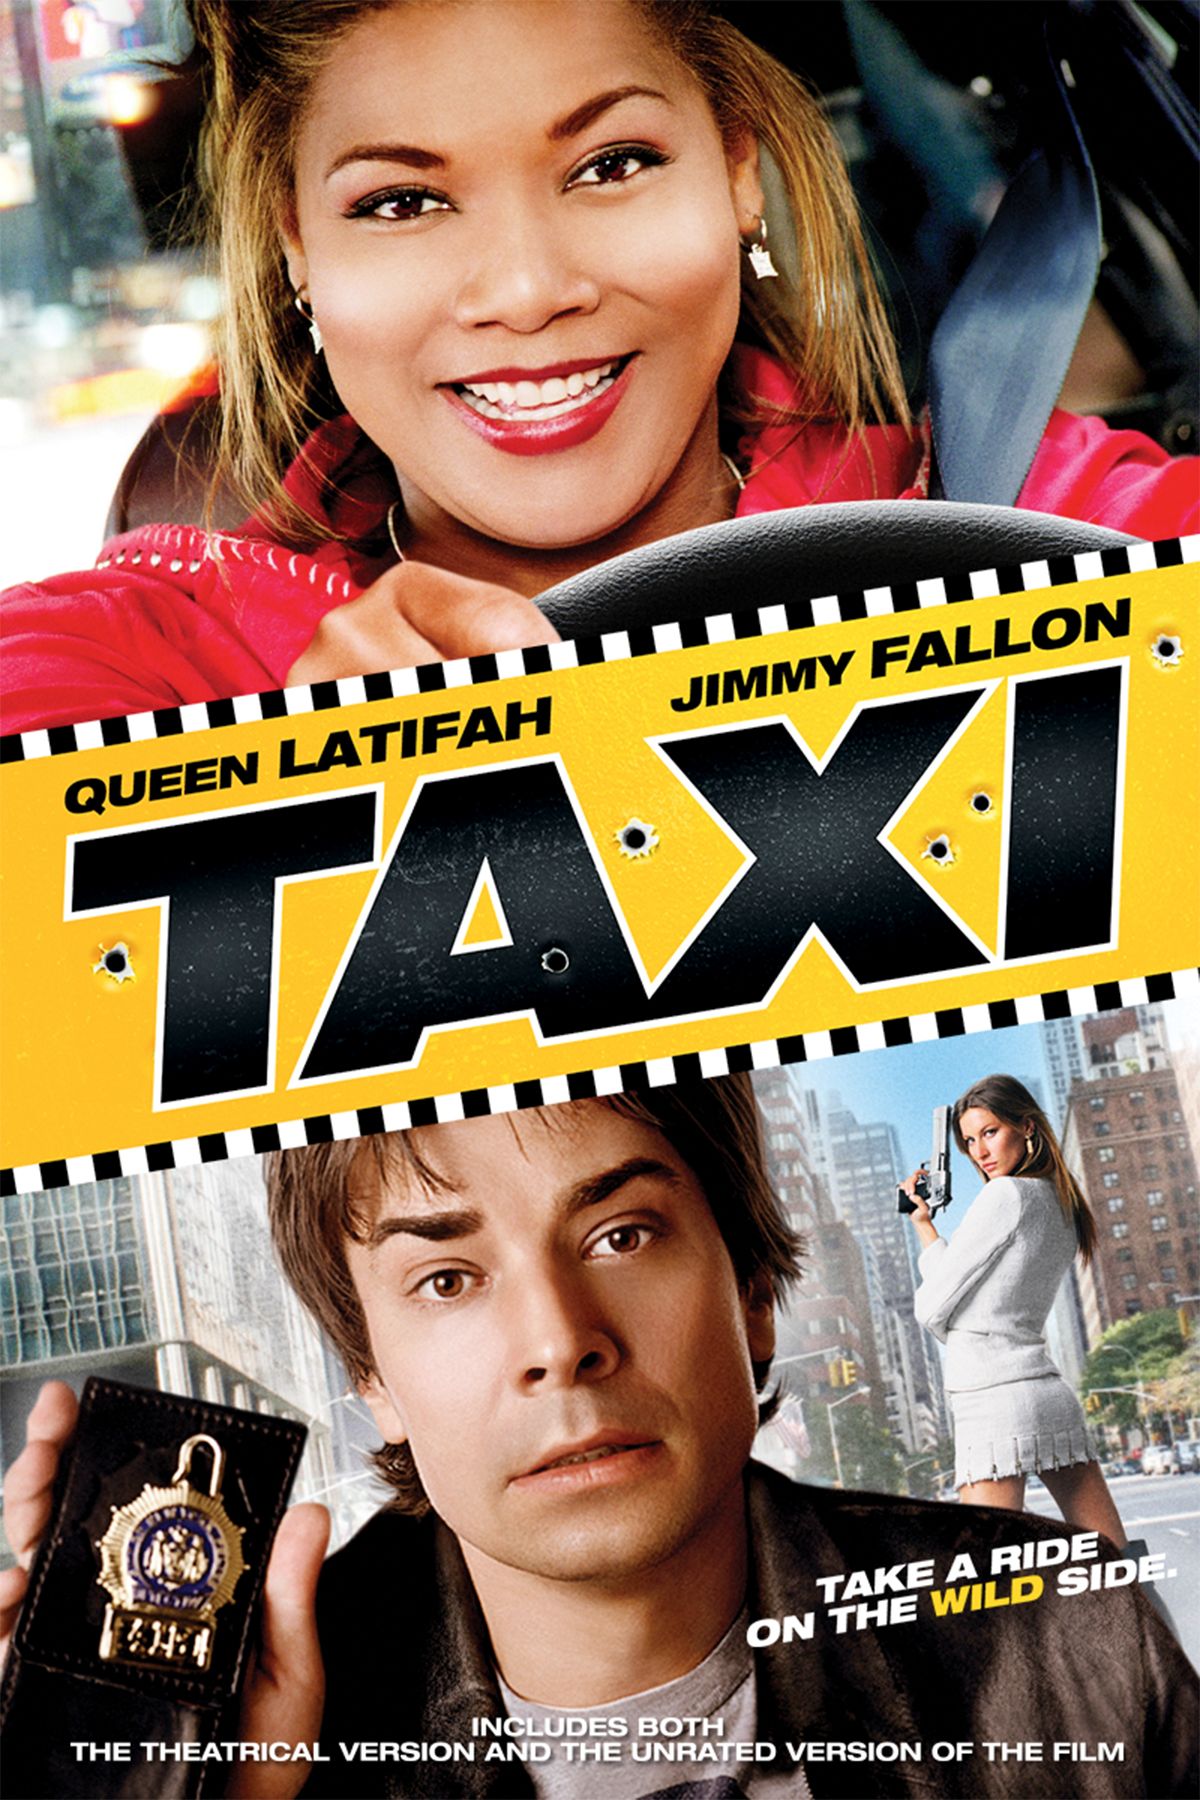 anthony stoute recommends Taxi Full Movie Free